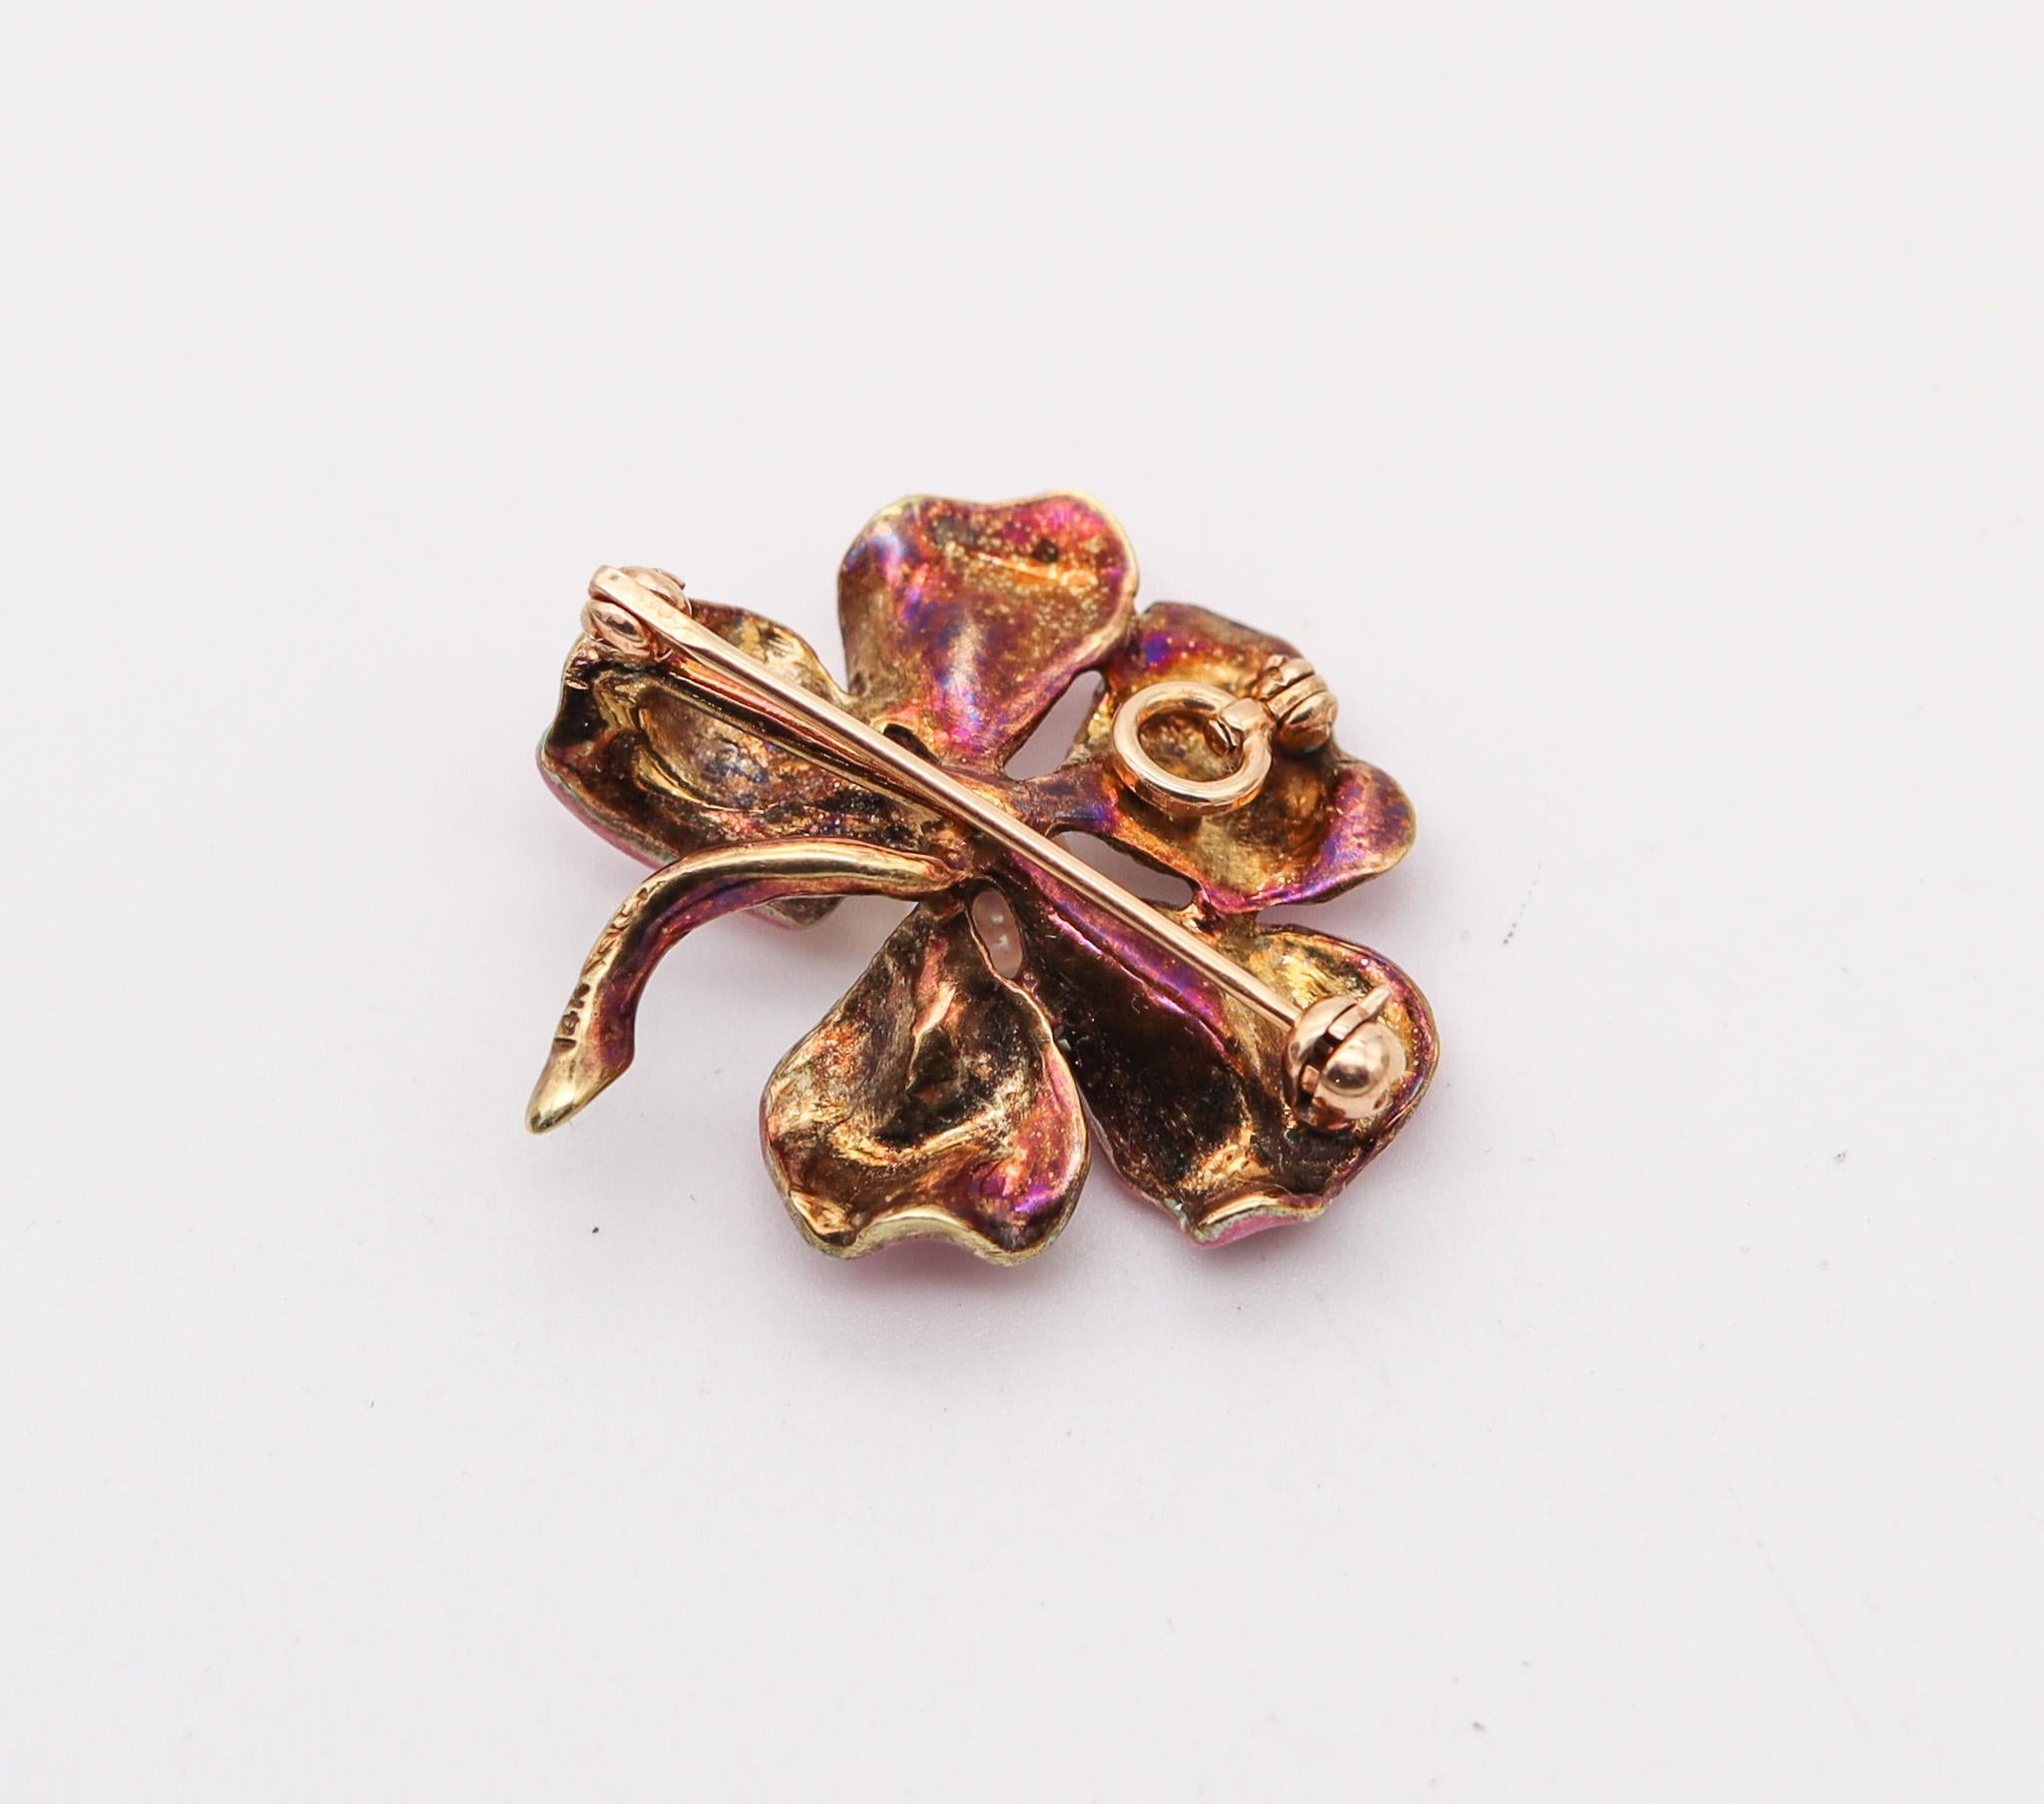 Enameled flower brooch designed by Larter & Son.

An exceptional flower brooch, created in Newark New Jersey by the jewelry company of Larter & Sons., back in the 1900. This versatile beautiful pendant-brooch has been carefully crafted during the